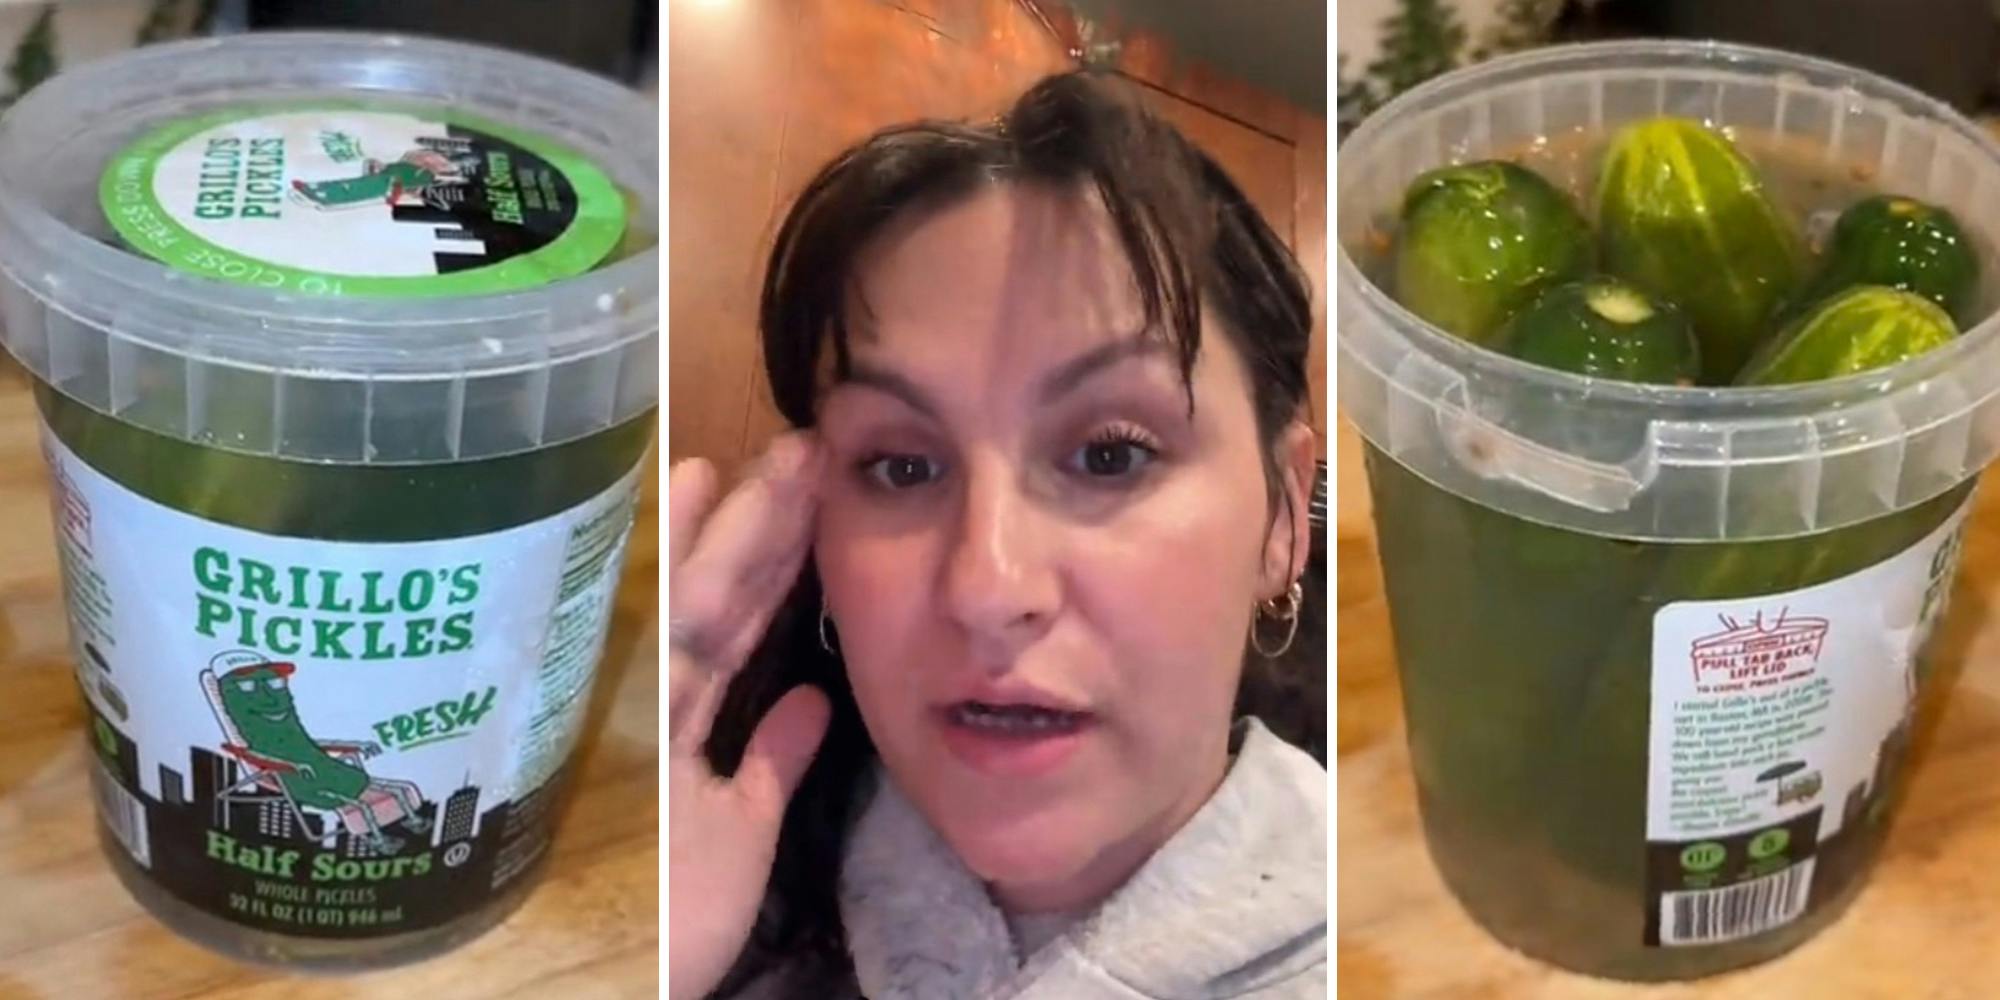 Customer drinks from jar of Grillo’s Pickles. Then she notices something strange